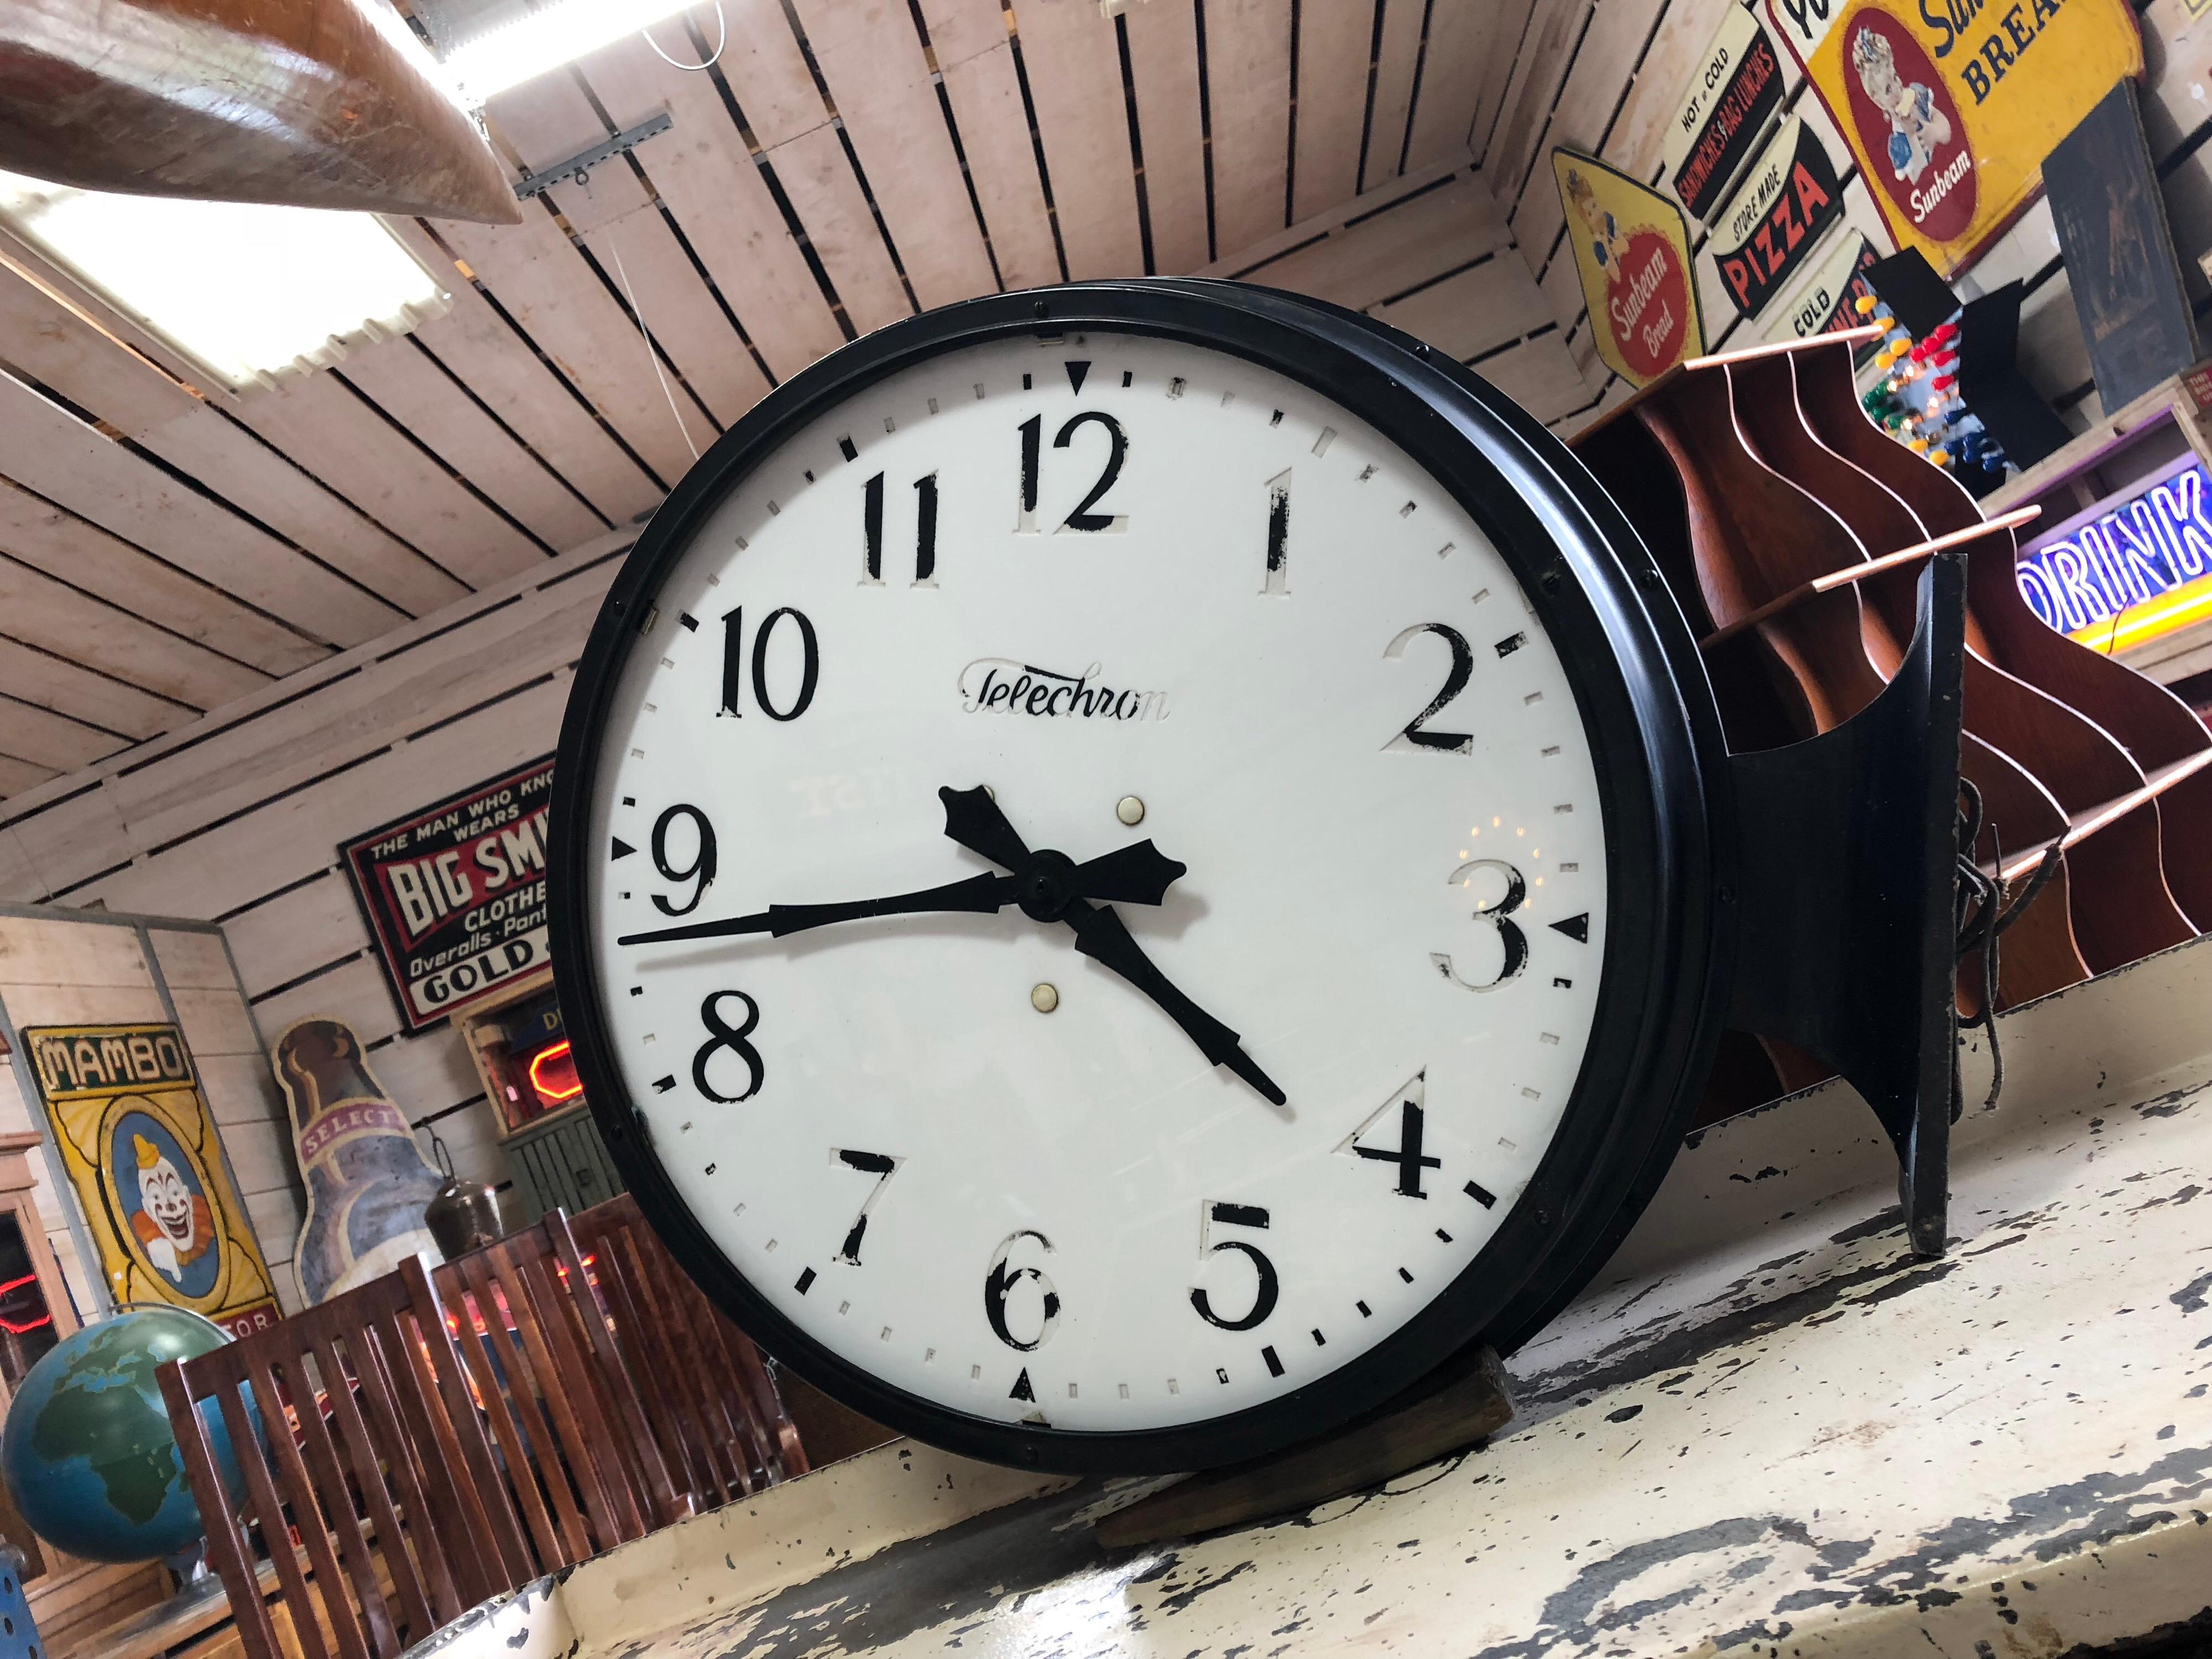 Antique double sided train station clock with milk glass faces by Telechron.